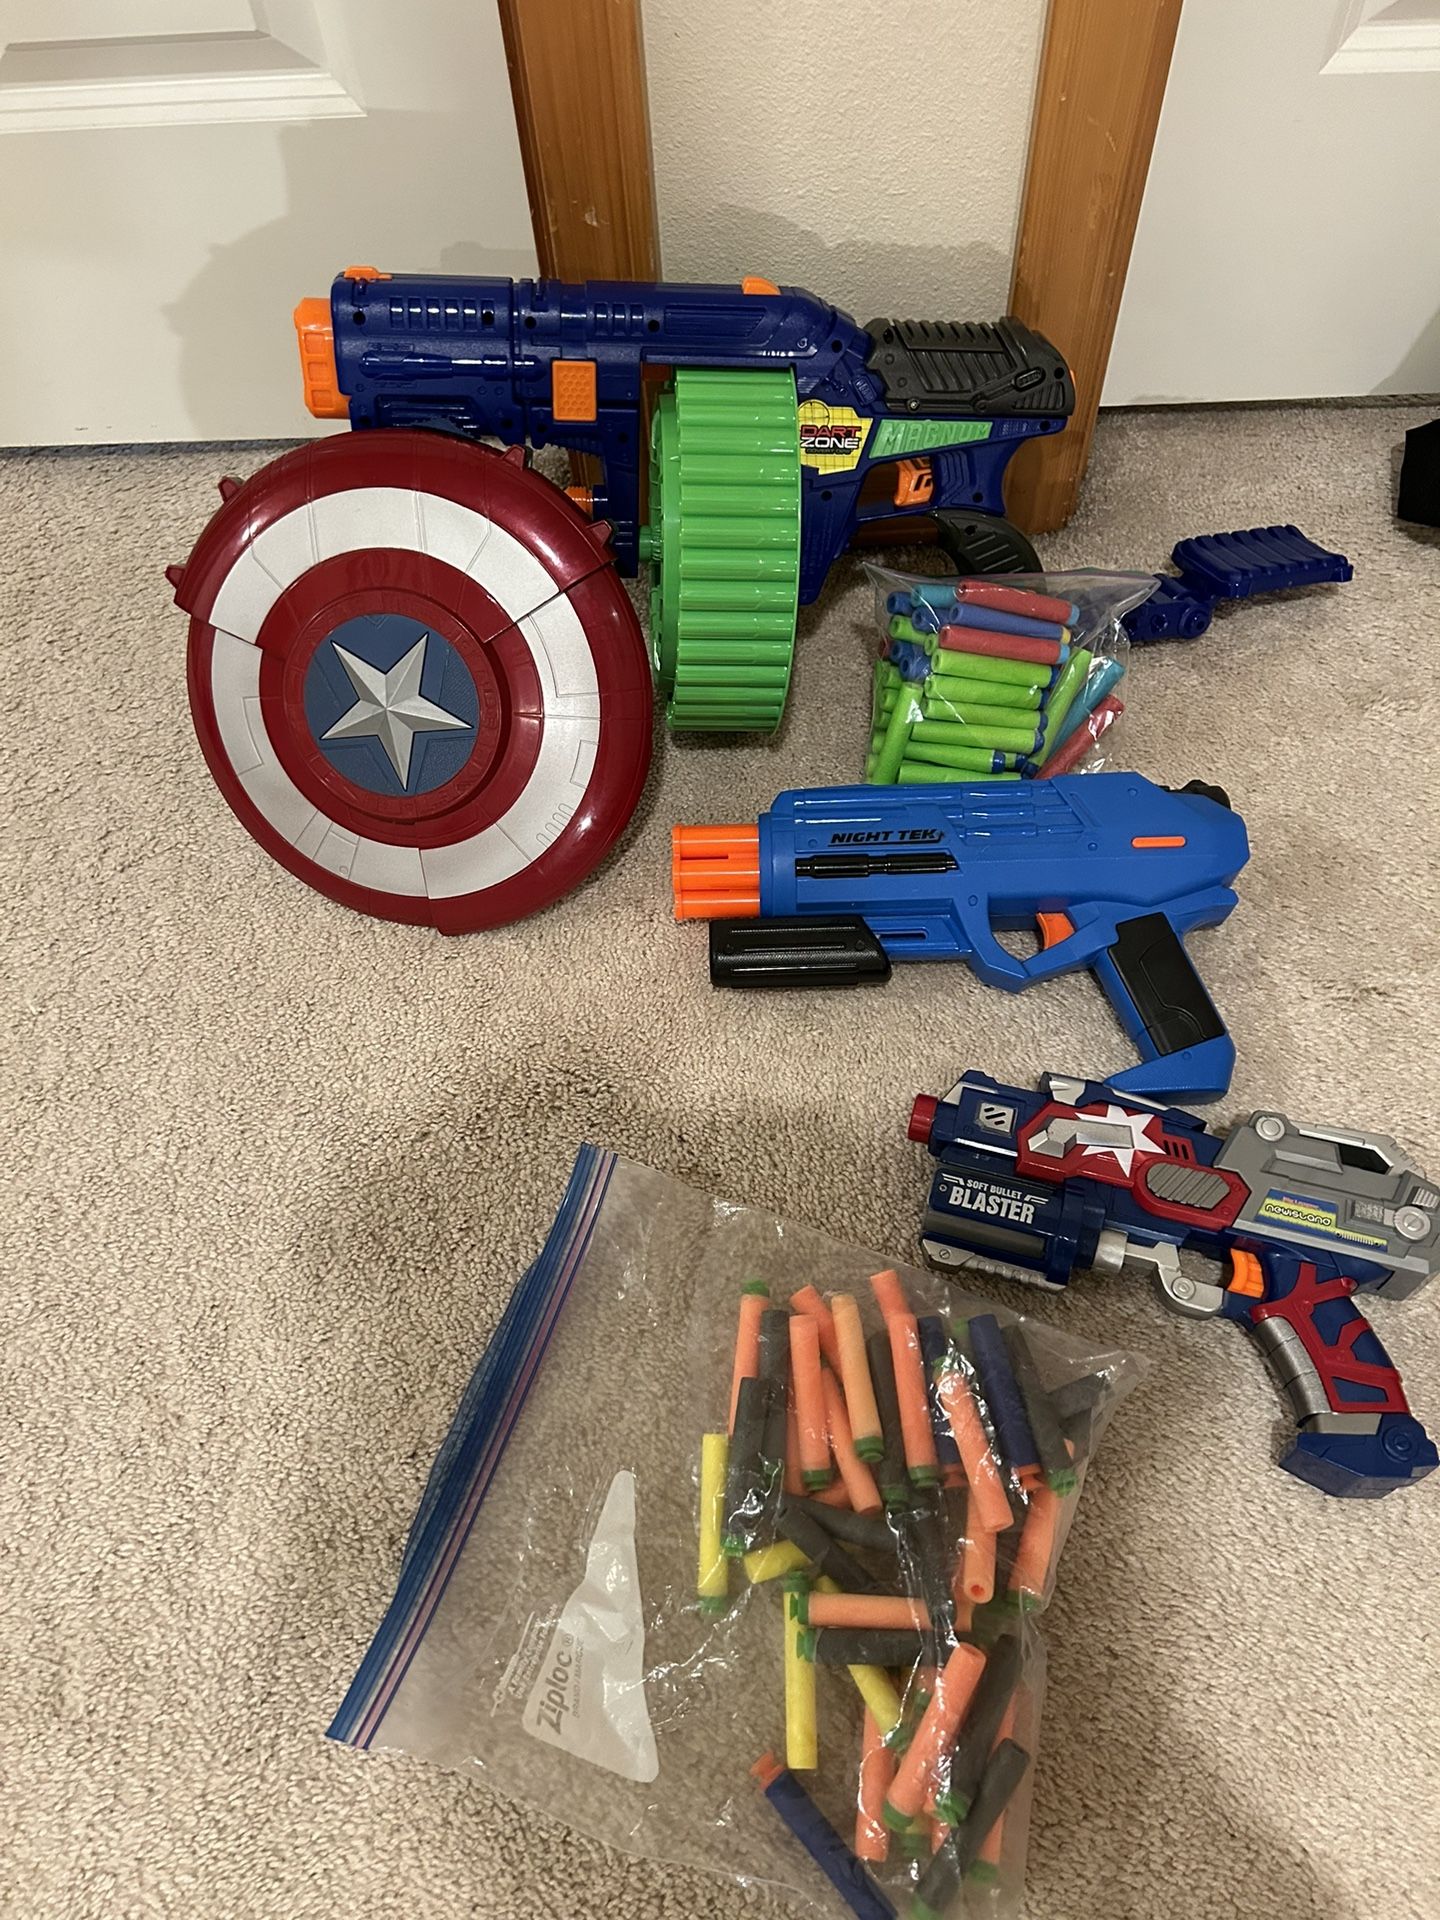 Misc Toys-Bow and arrows, Captain America, Toy Rifle